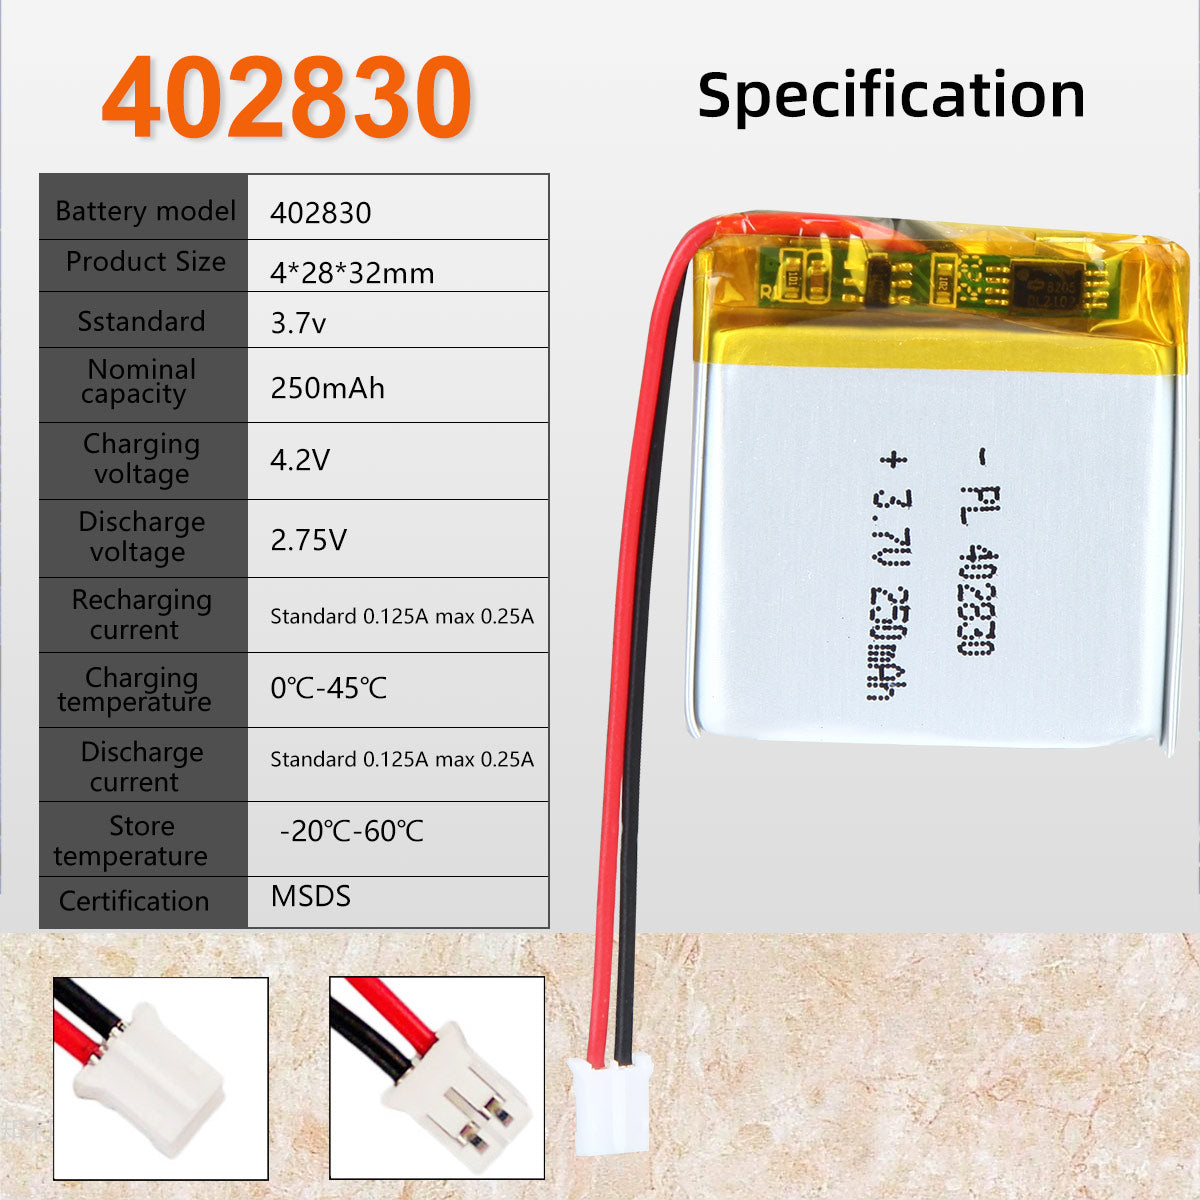 3.7V 250mAh 402830 Rechargeable Lithium Polymer Battery